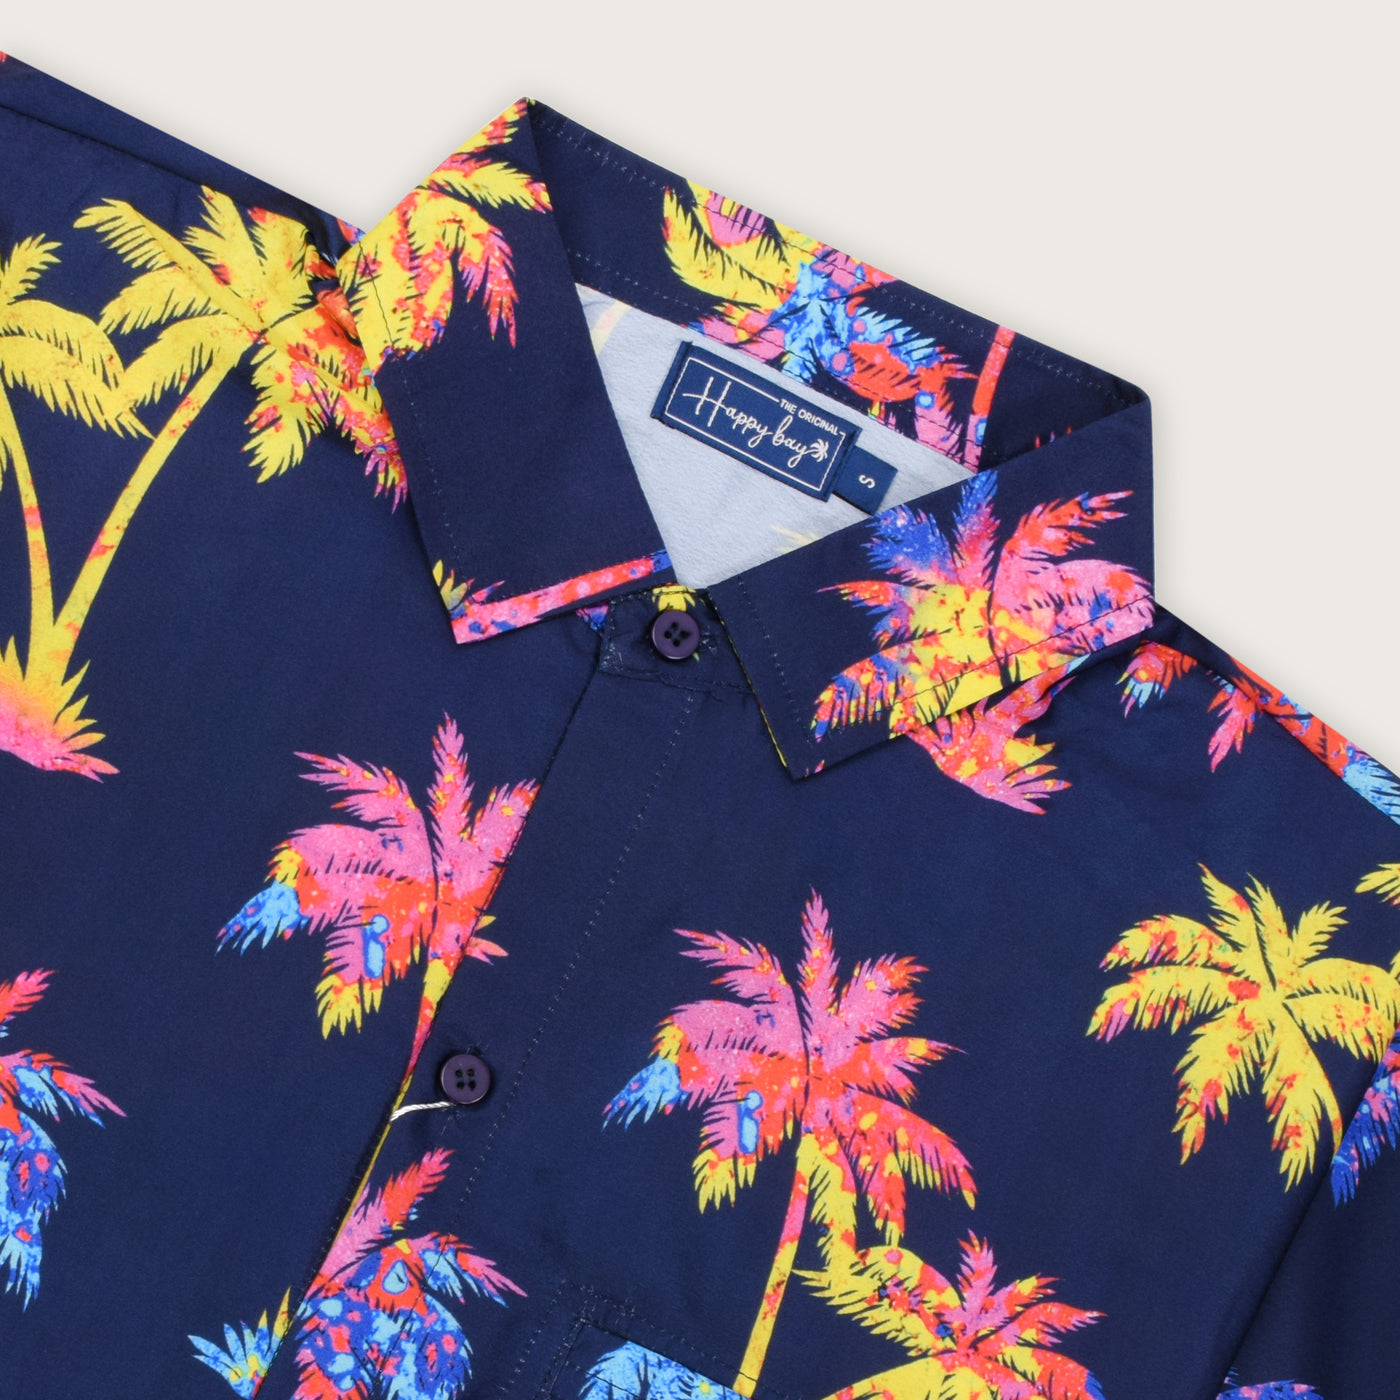 The Colorful palms shirt